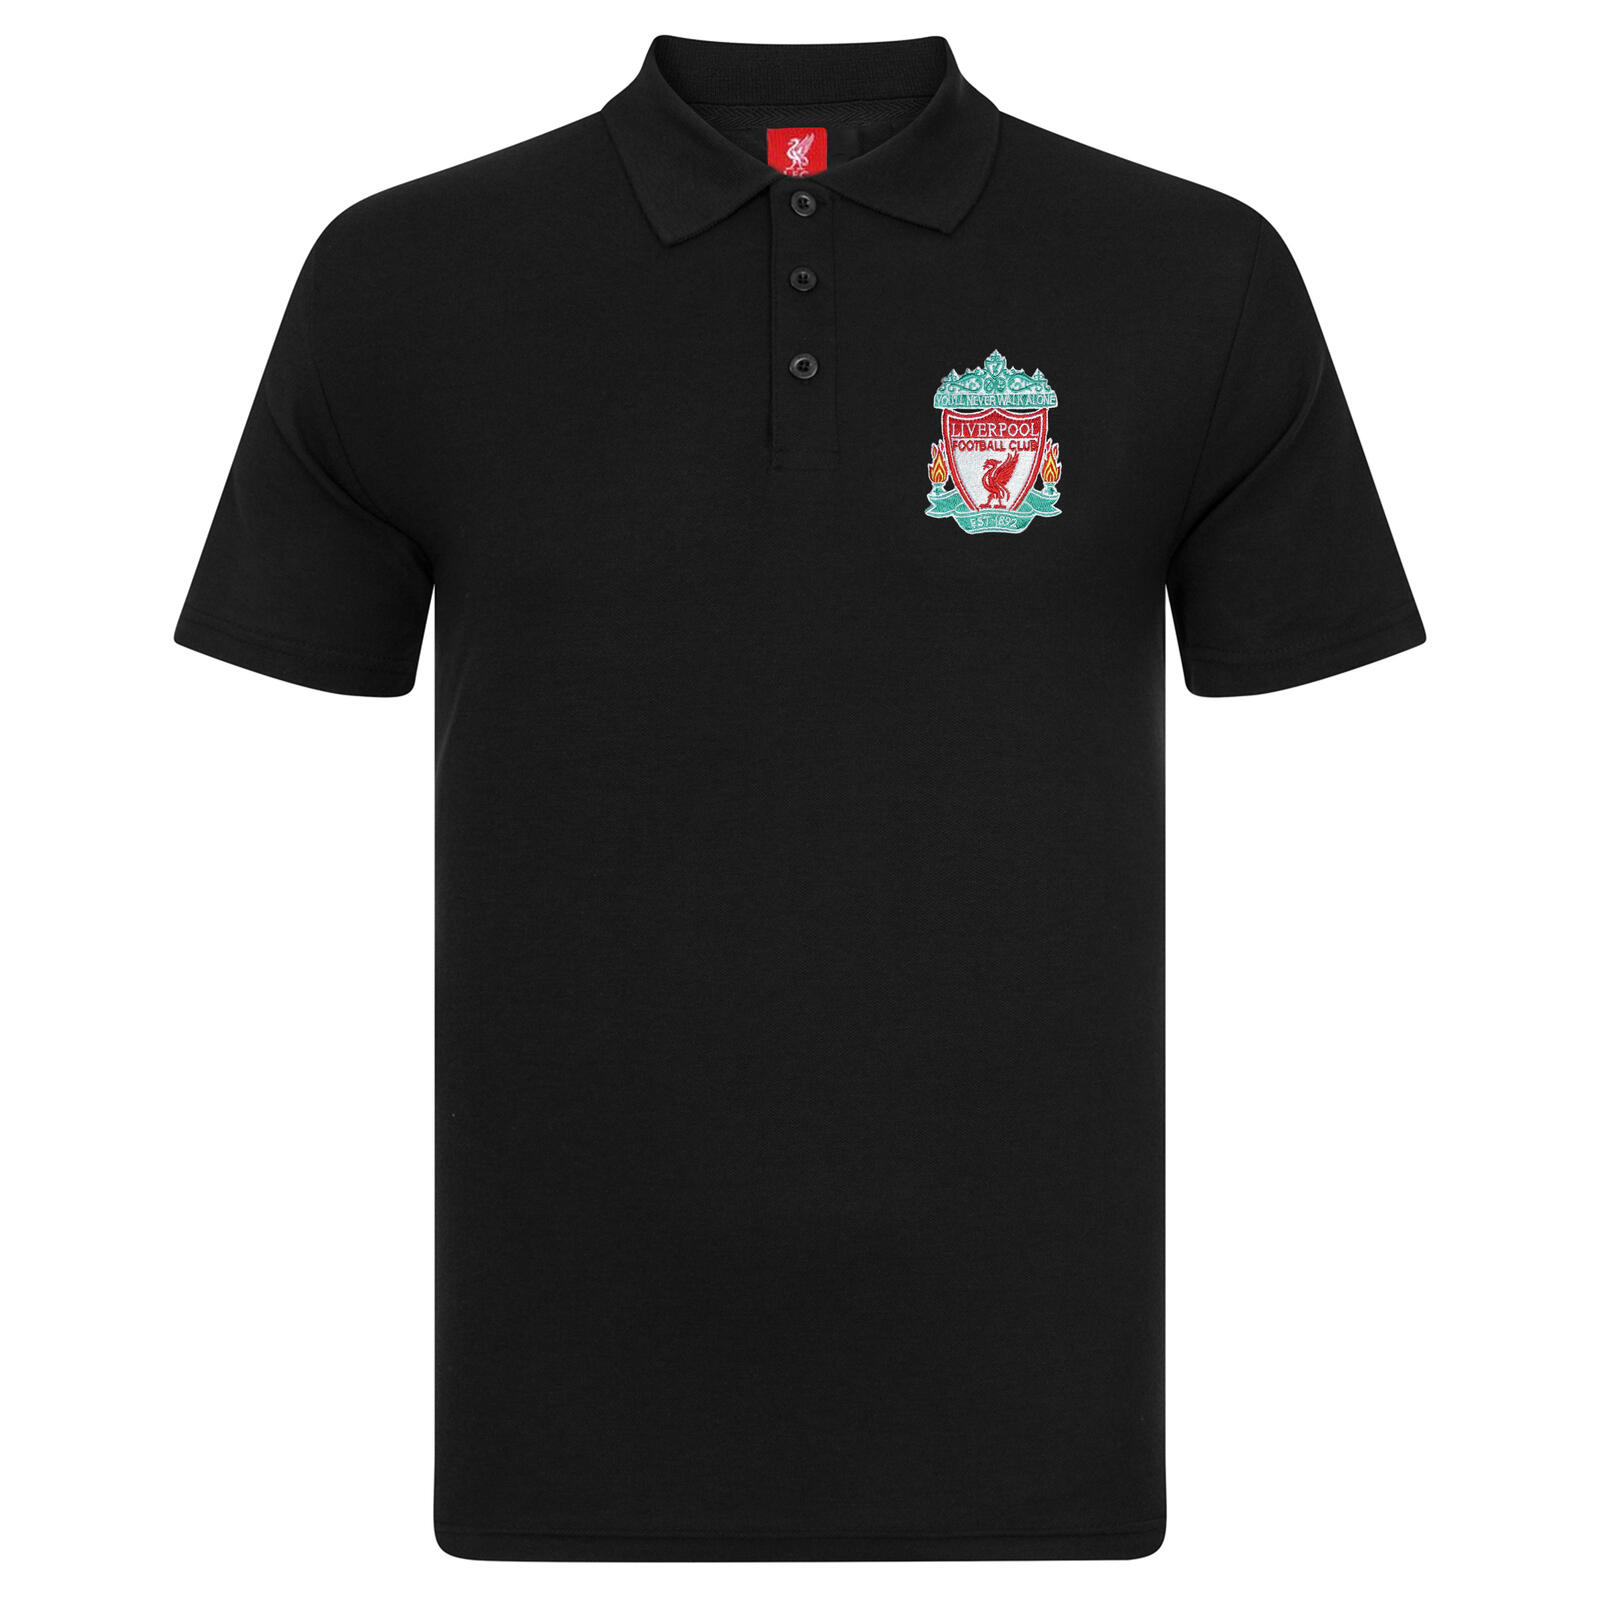 LIVERPOOL FC Liverpool FC Mens Polo Shirt Crest OFFICIAL Football Gift